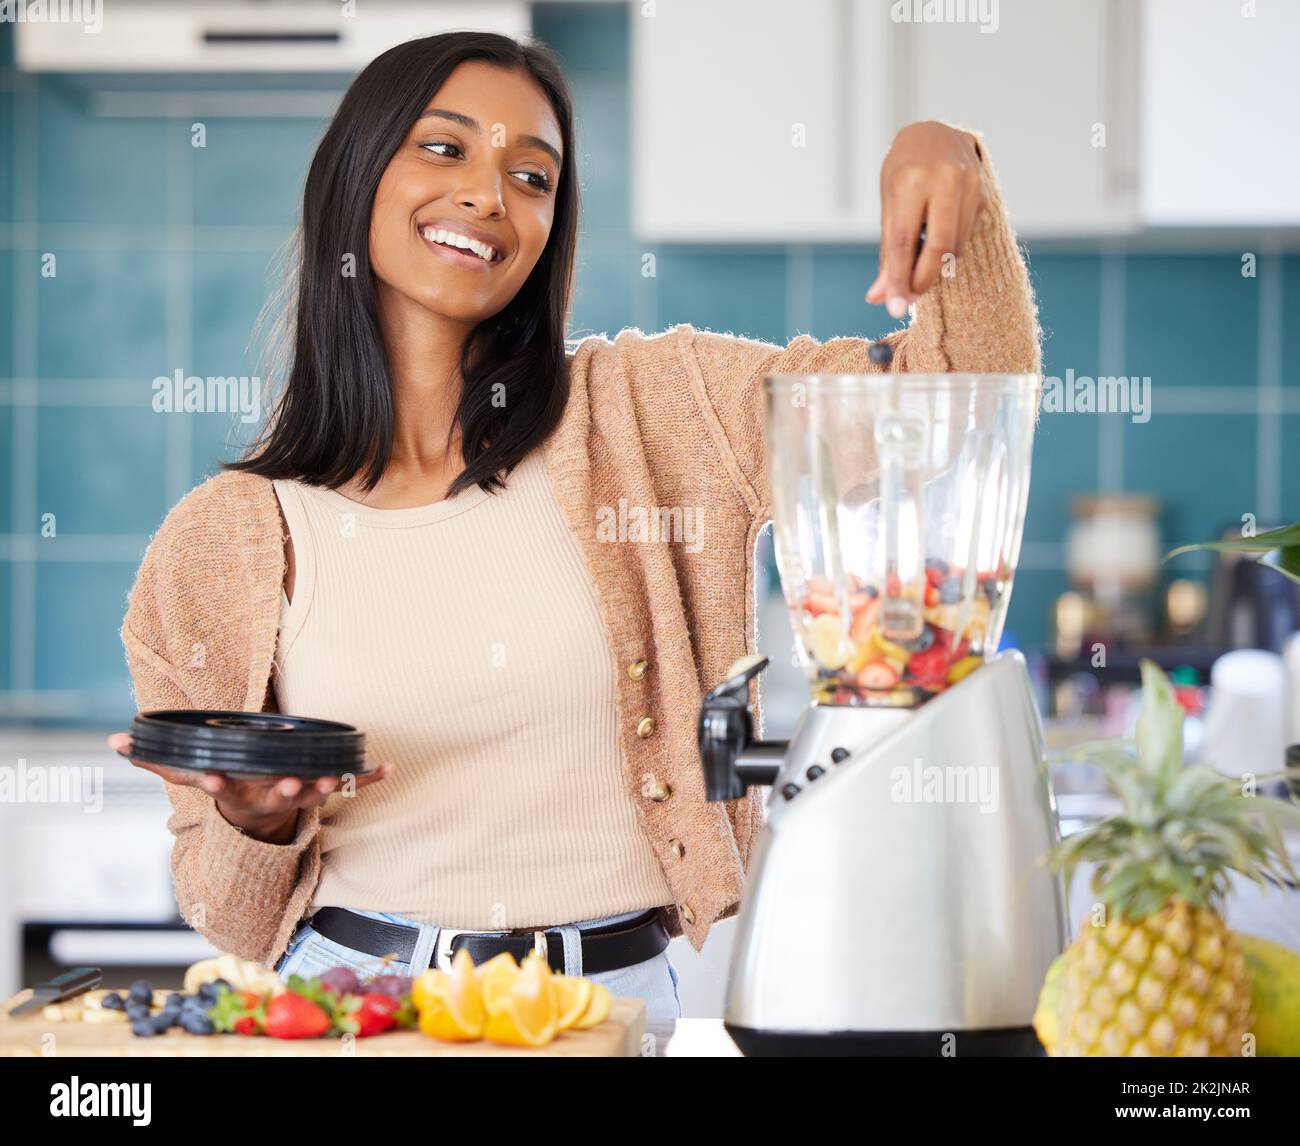 Loading her smoothie with lots of fresh ingredients. Shot of a young woman preparing a healthy smoothie at home. Stock Photo